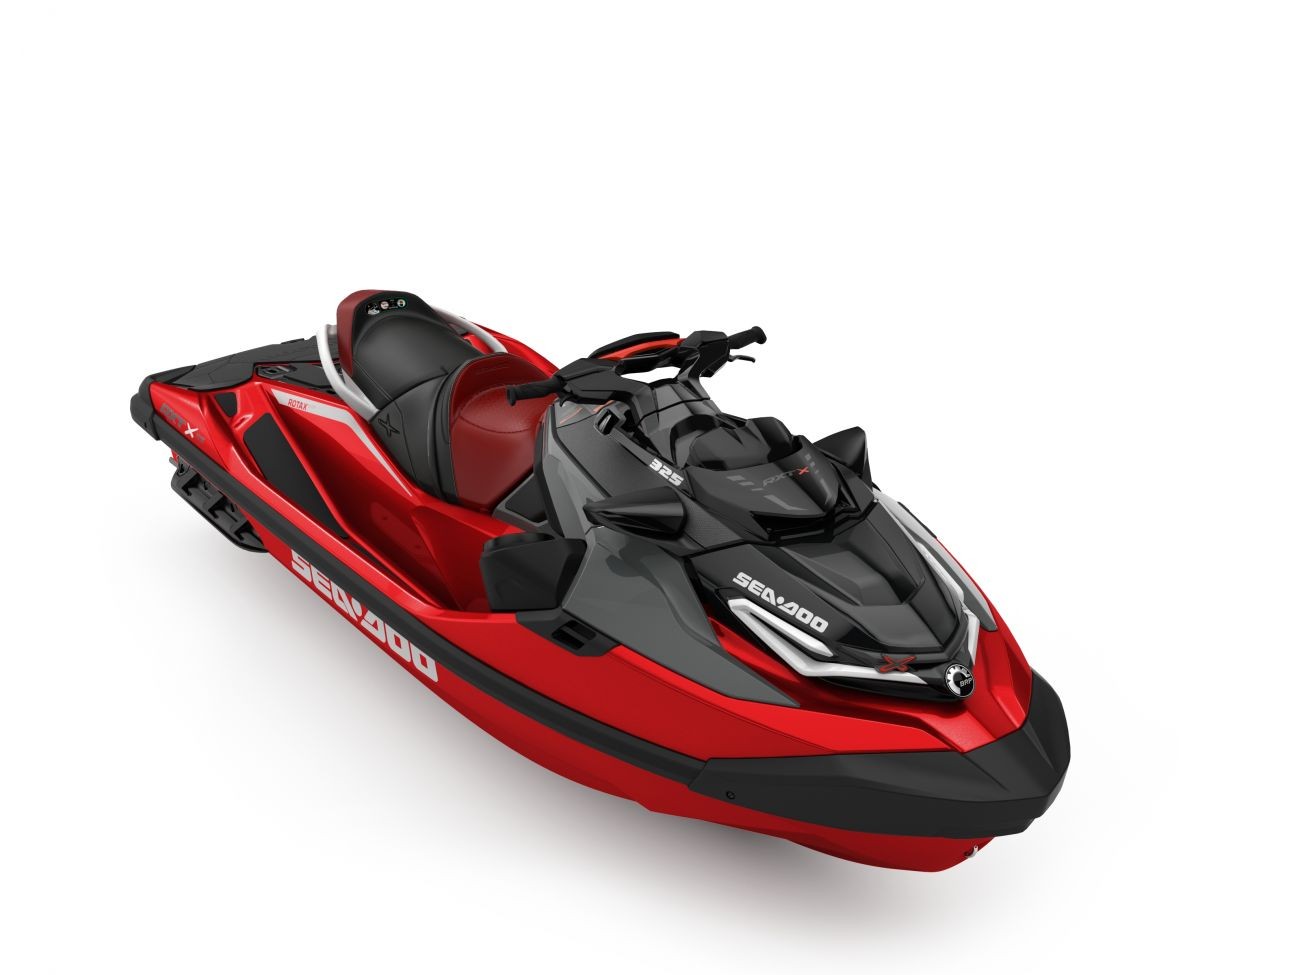  WATERSPORTS SEA-DOO_IMAGERY MY24 PERFORMANCE SEAMY24RXTXRSss325FieryRed00010RB0034FRINT